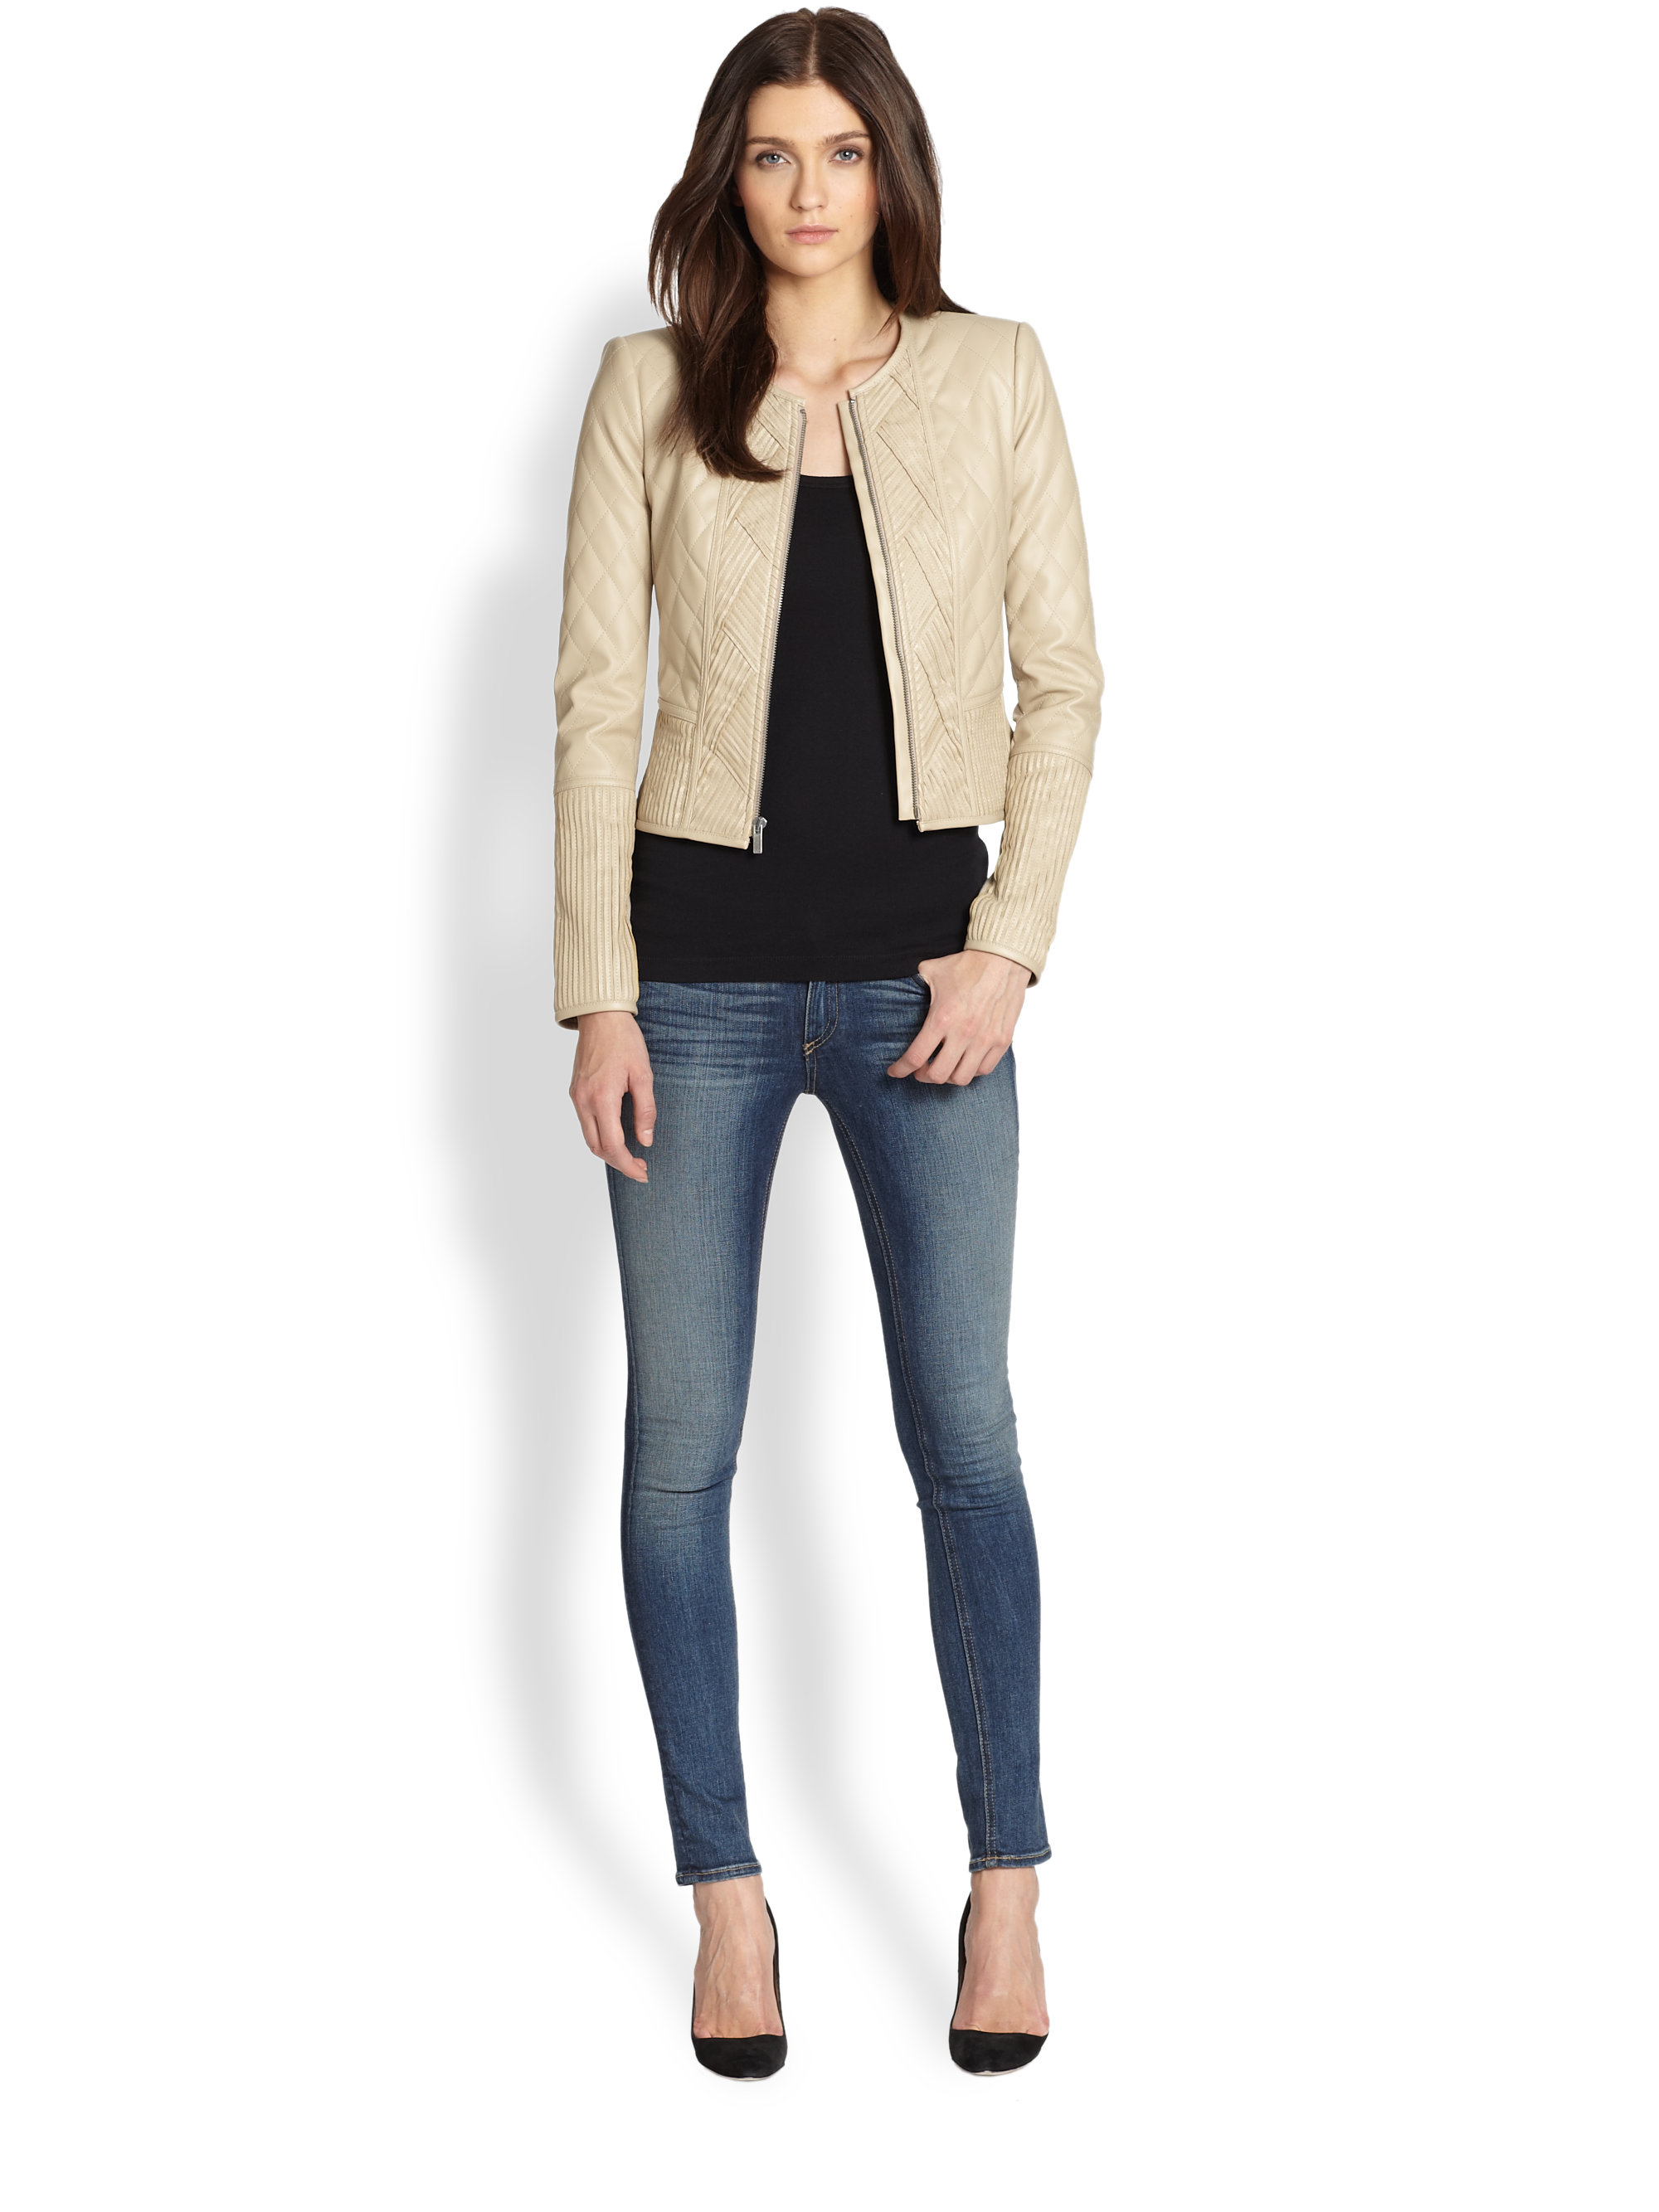 Lyst - Bcbgmaxazria Quilted Faux Leather Jacket in Natural